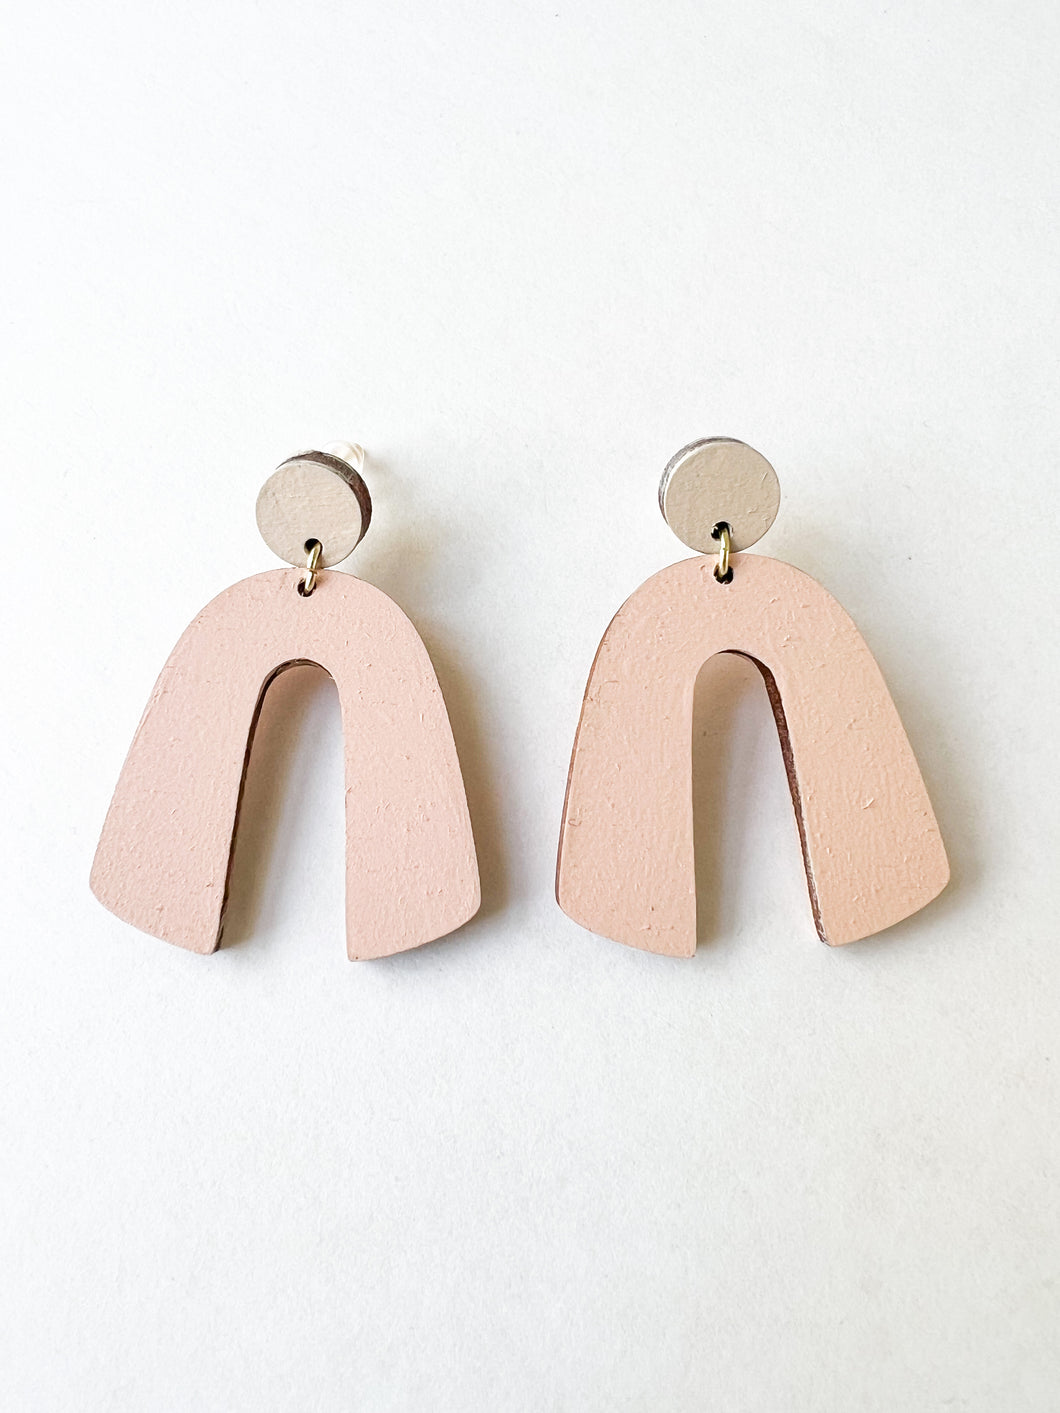 Tan and Ballet Pink Hand Painted Statement Earrings